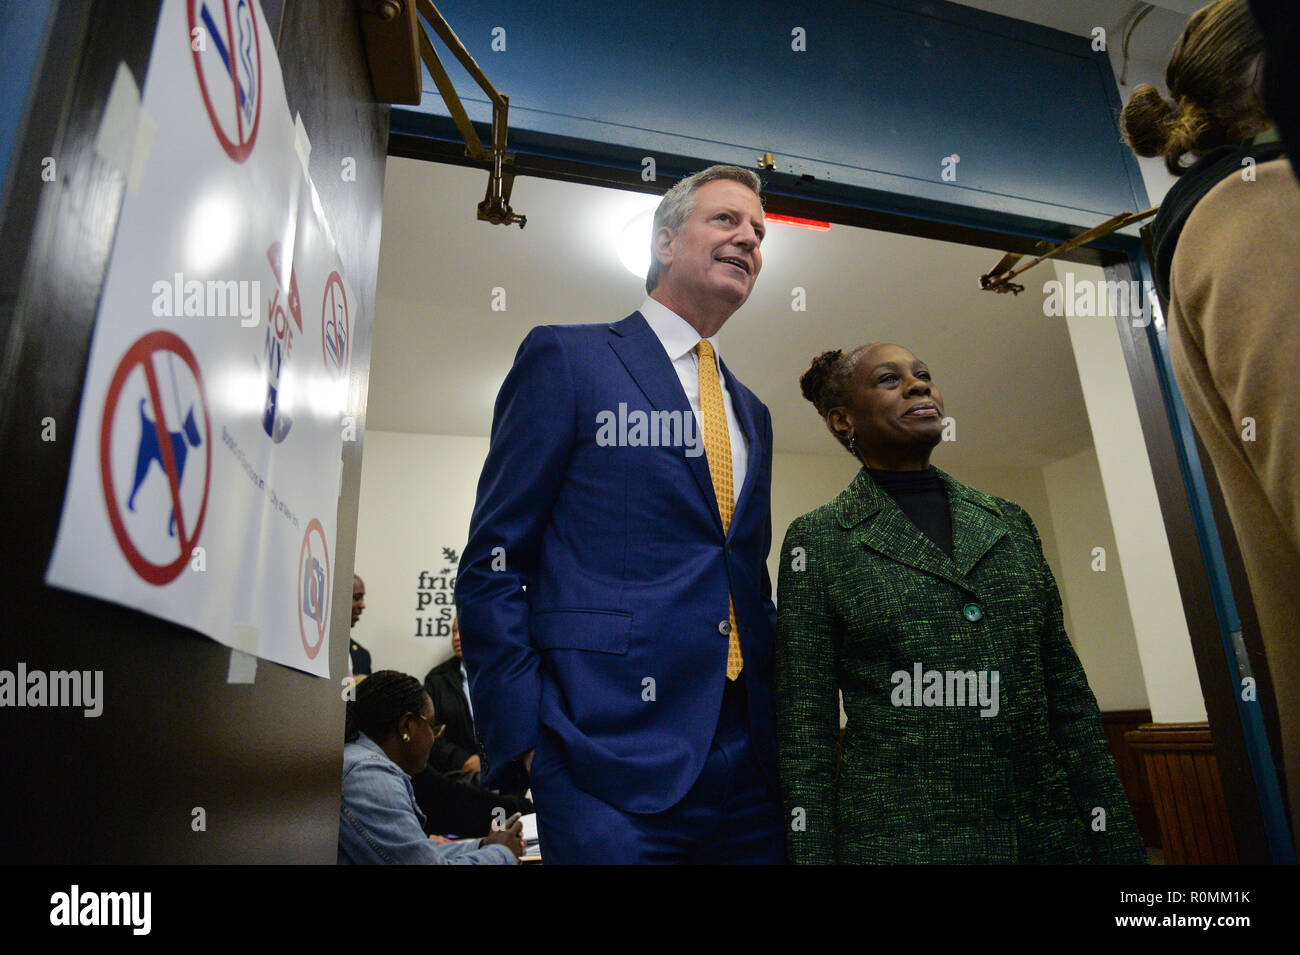 New York, USA. 6th November, 2018. Mayor Bill de Blasio and Chirlane McCray cast their vote during the Midterm Elections in the Park Slope section of Brooklyn, New York on November 6, 2018. Credit: Erik Pendzich/Alamy Live News Stock Photo